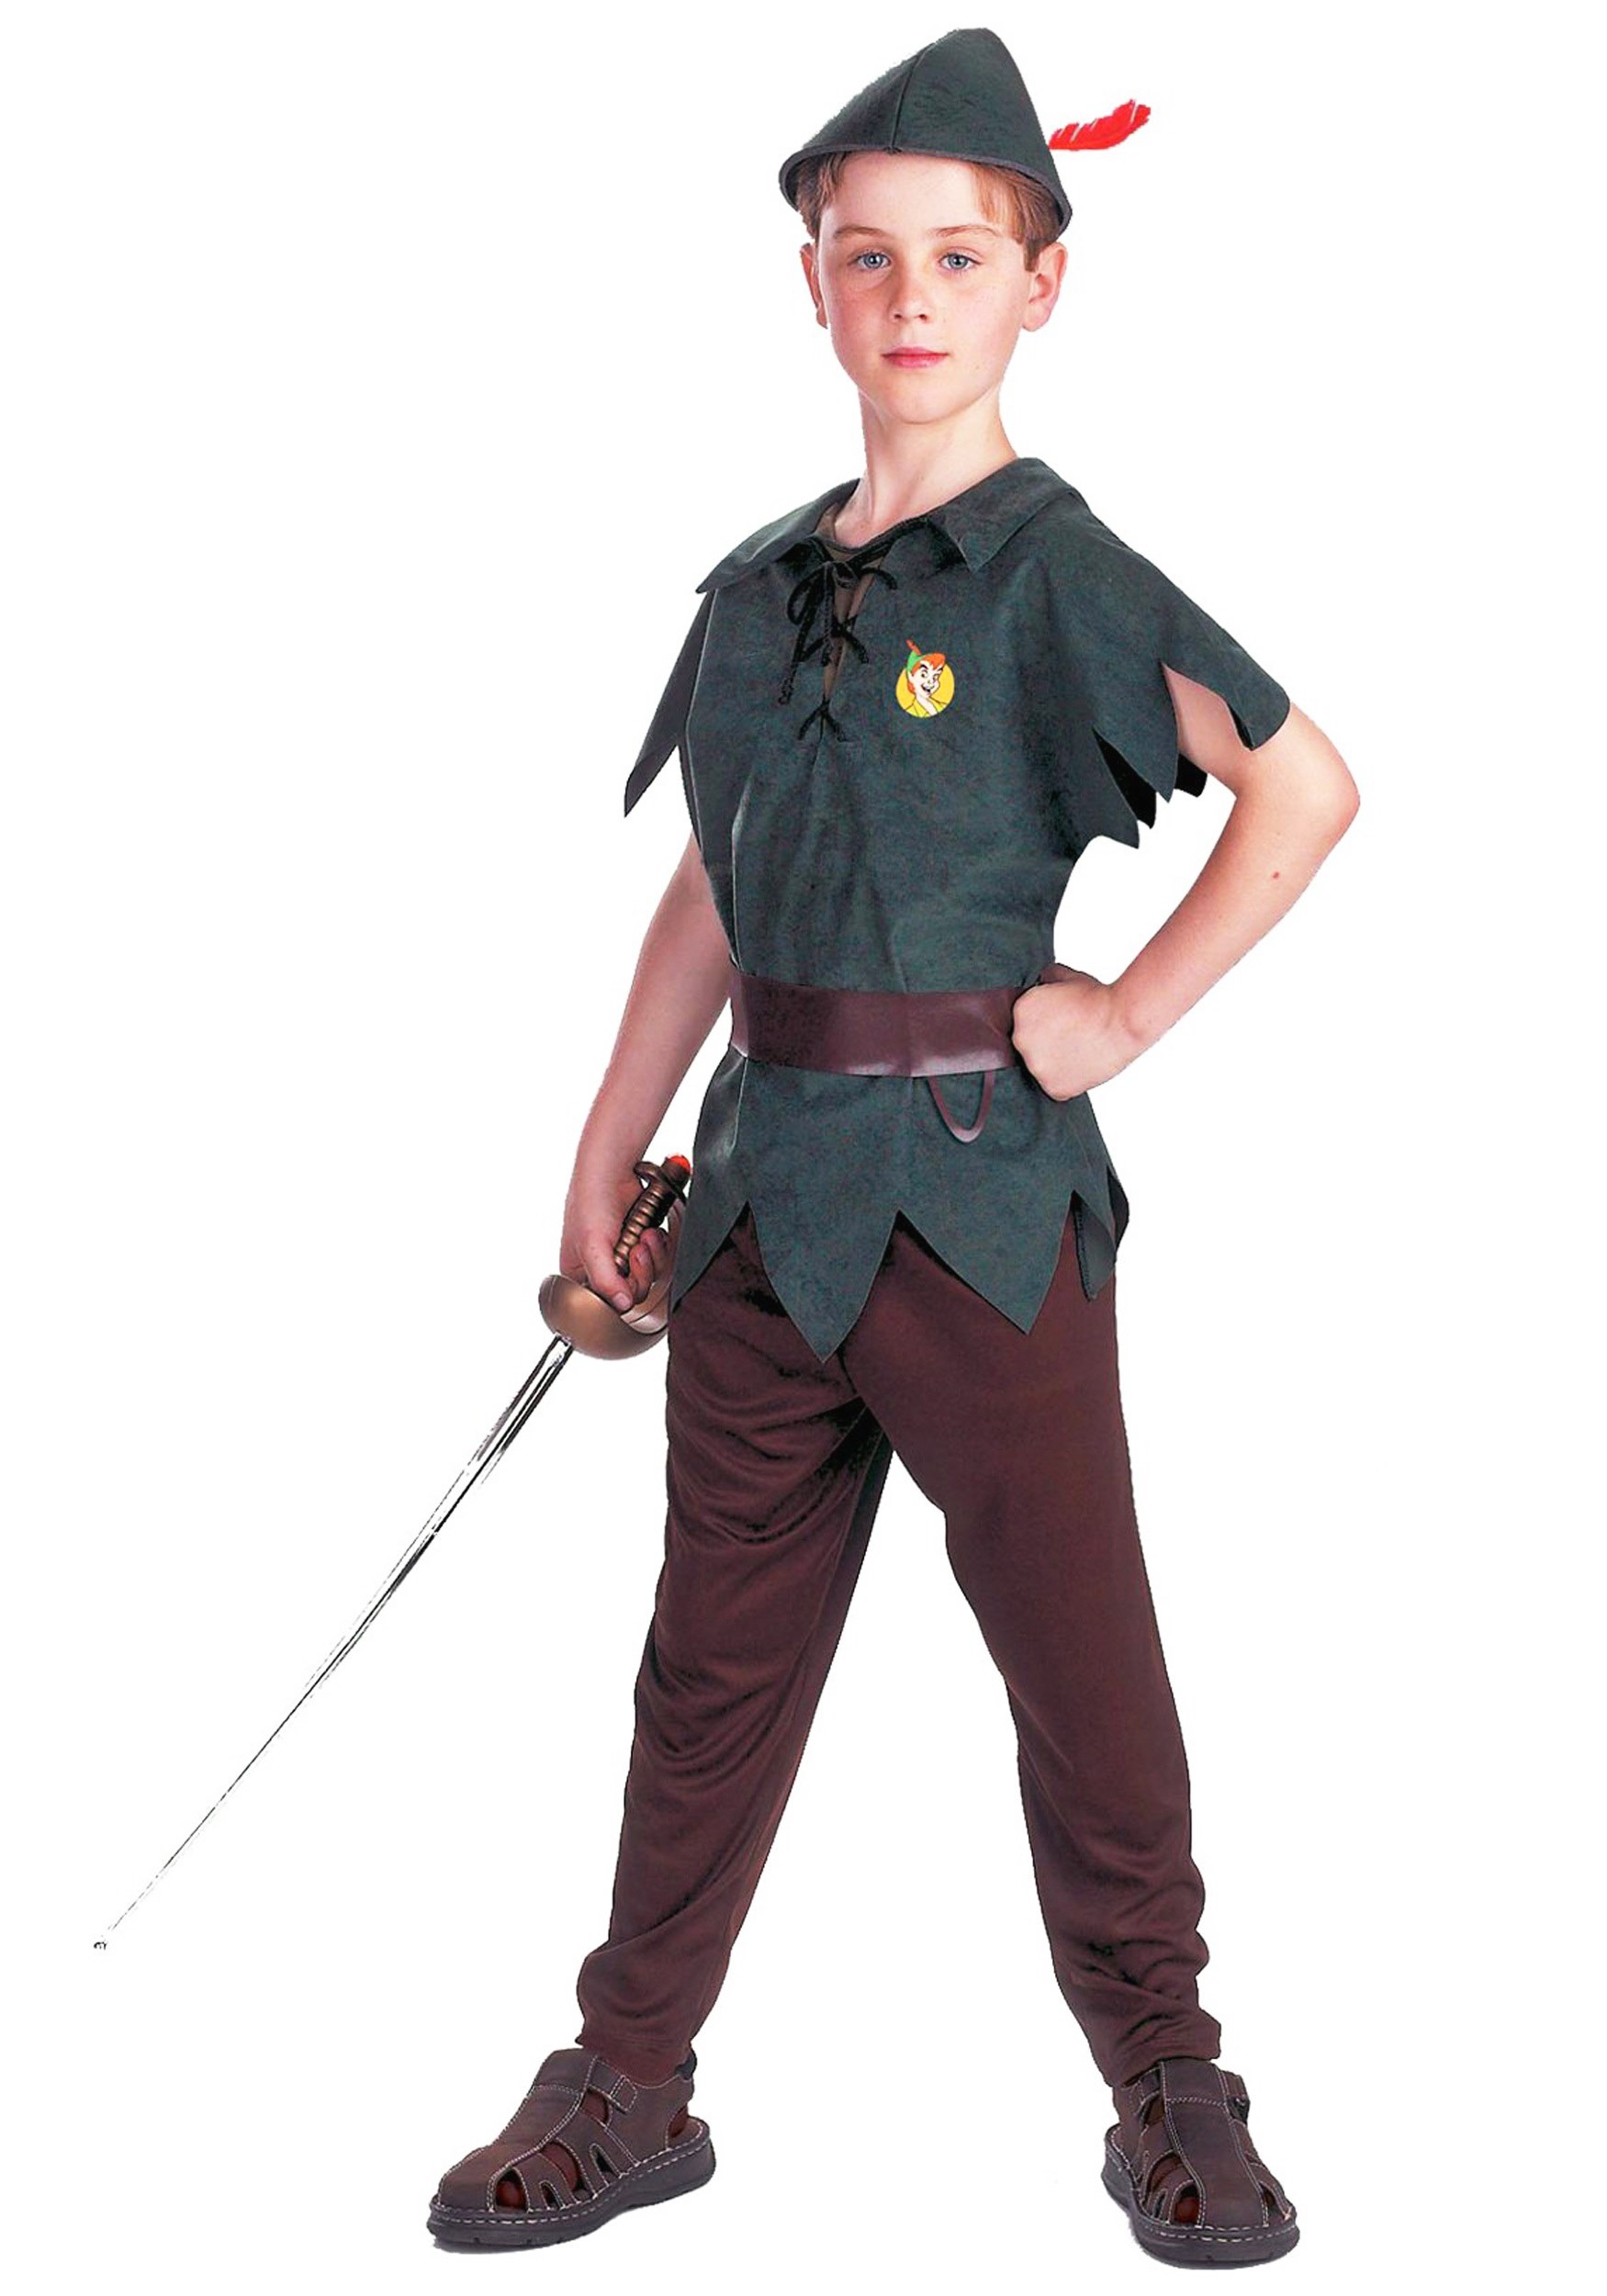 Photos - Fancy Dress Disguise Peter Pan Costume for Kids Brown/Green DI5963